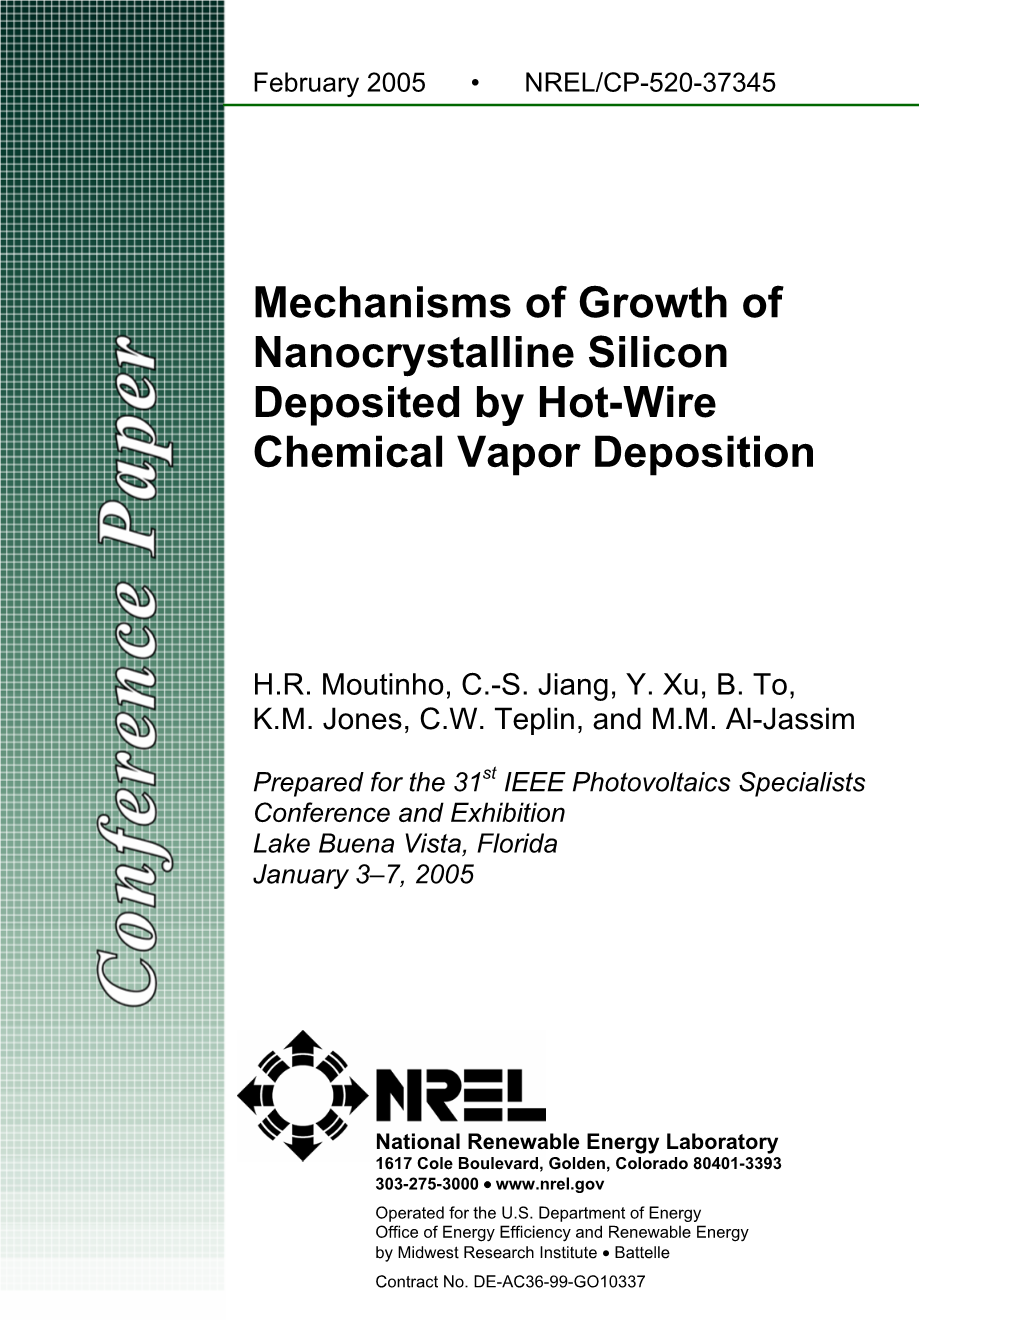 Mechanisms of Growth of Nanocrystalline Silicon Deposited by Hot-Wire Chemical Vapor Deposition